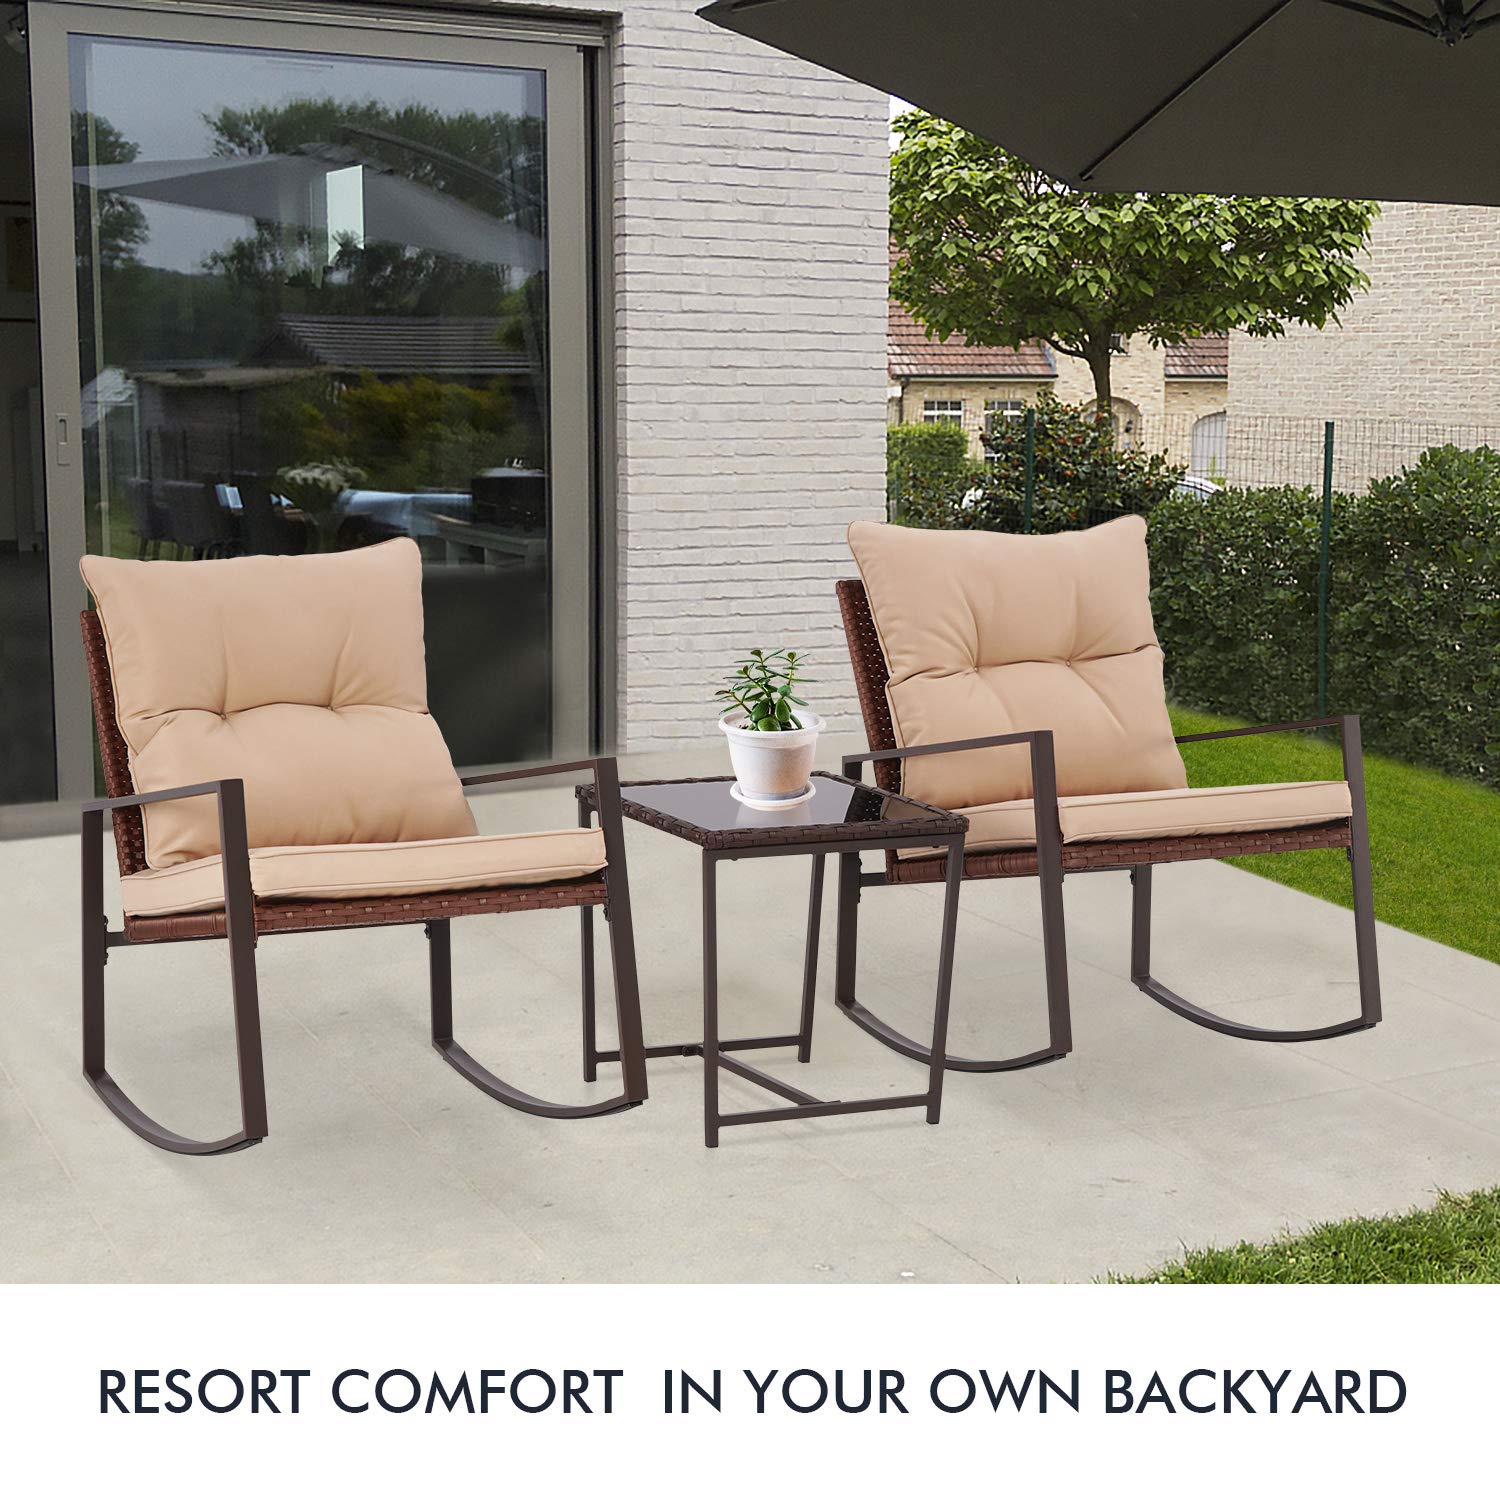 SUNCROWN 3 Piece Outdoor Bistro Set Patio Rocking Chair Brown Wicker Chairs with Brown Cushion and Glass-Top Table - image 2 of 7